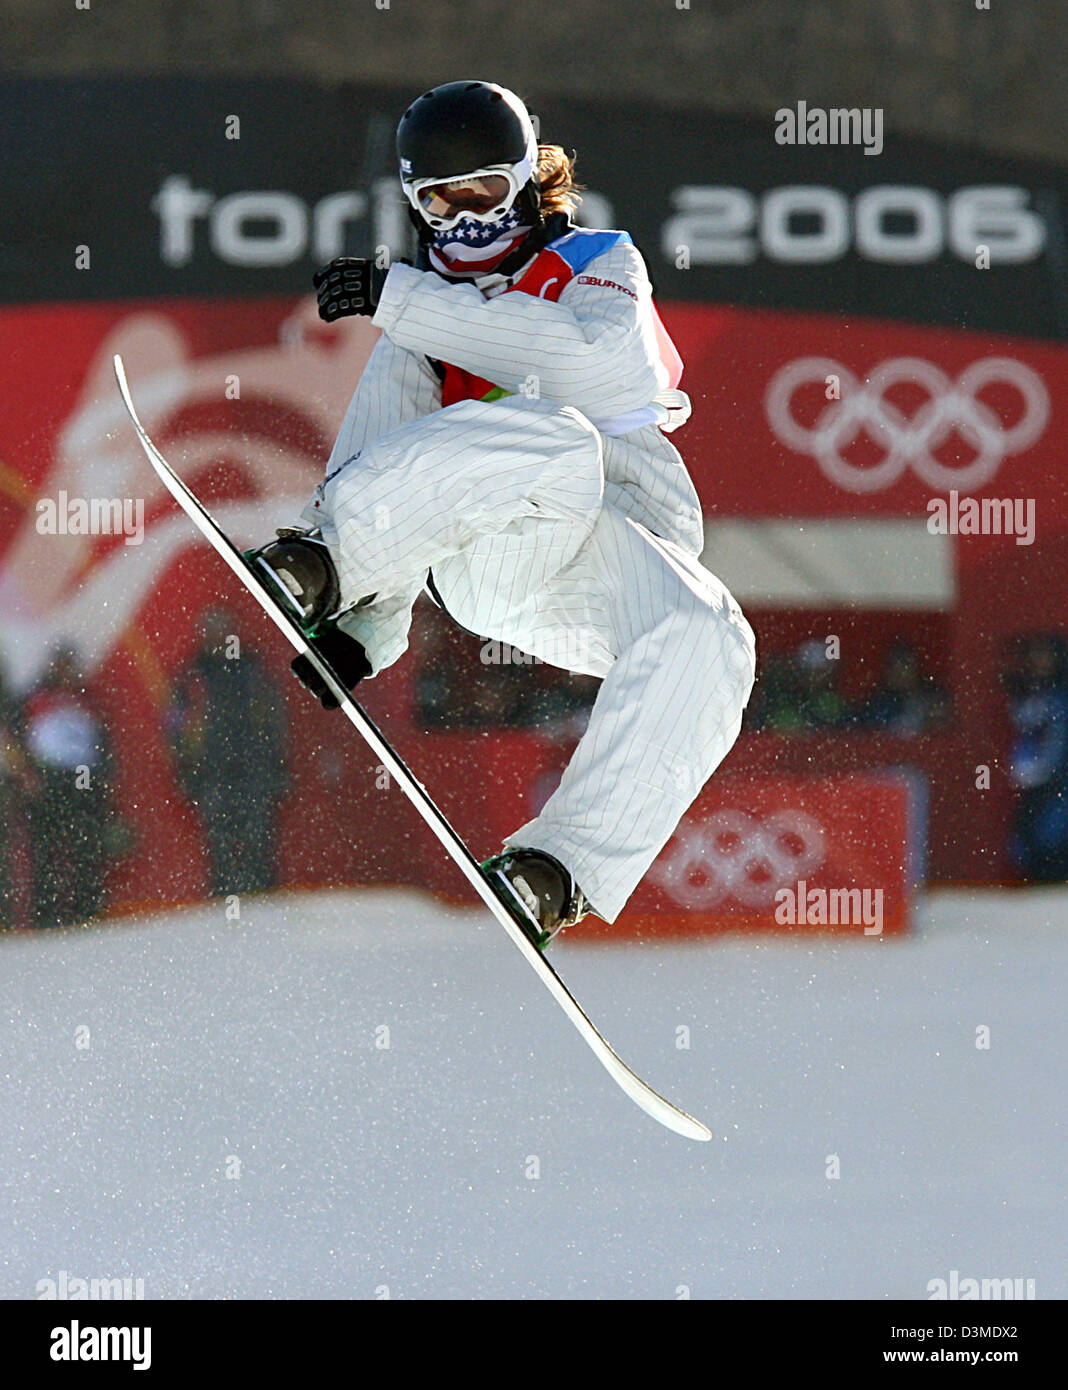 1,505 Shaun White Snowboarding Photos & High Res Pictures - Getty Images